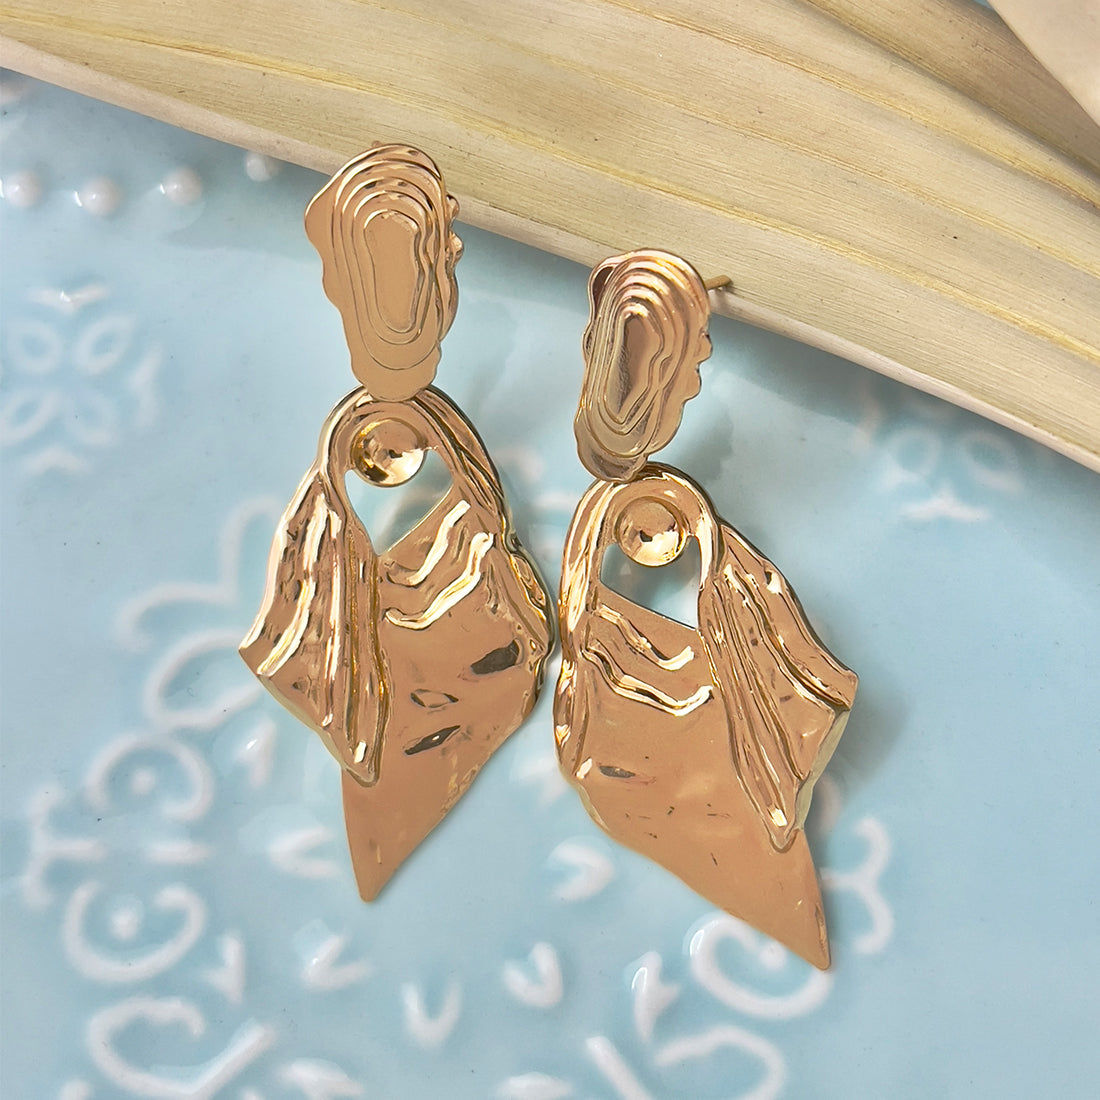 Oversized Hammered Gold-Toned Leaf Drop Earrings